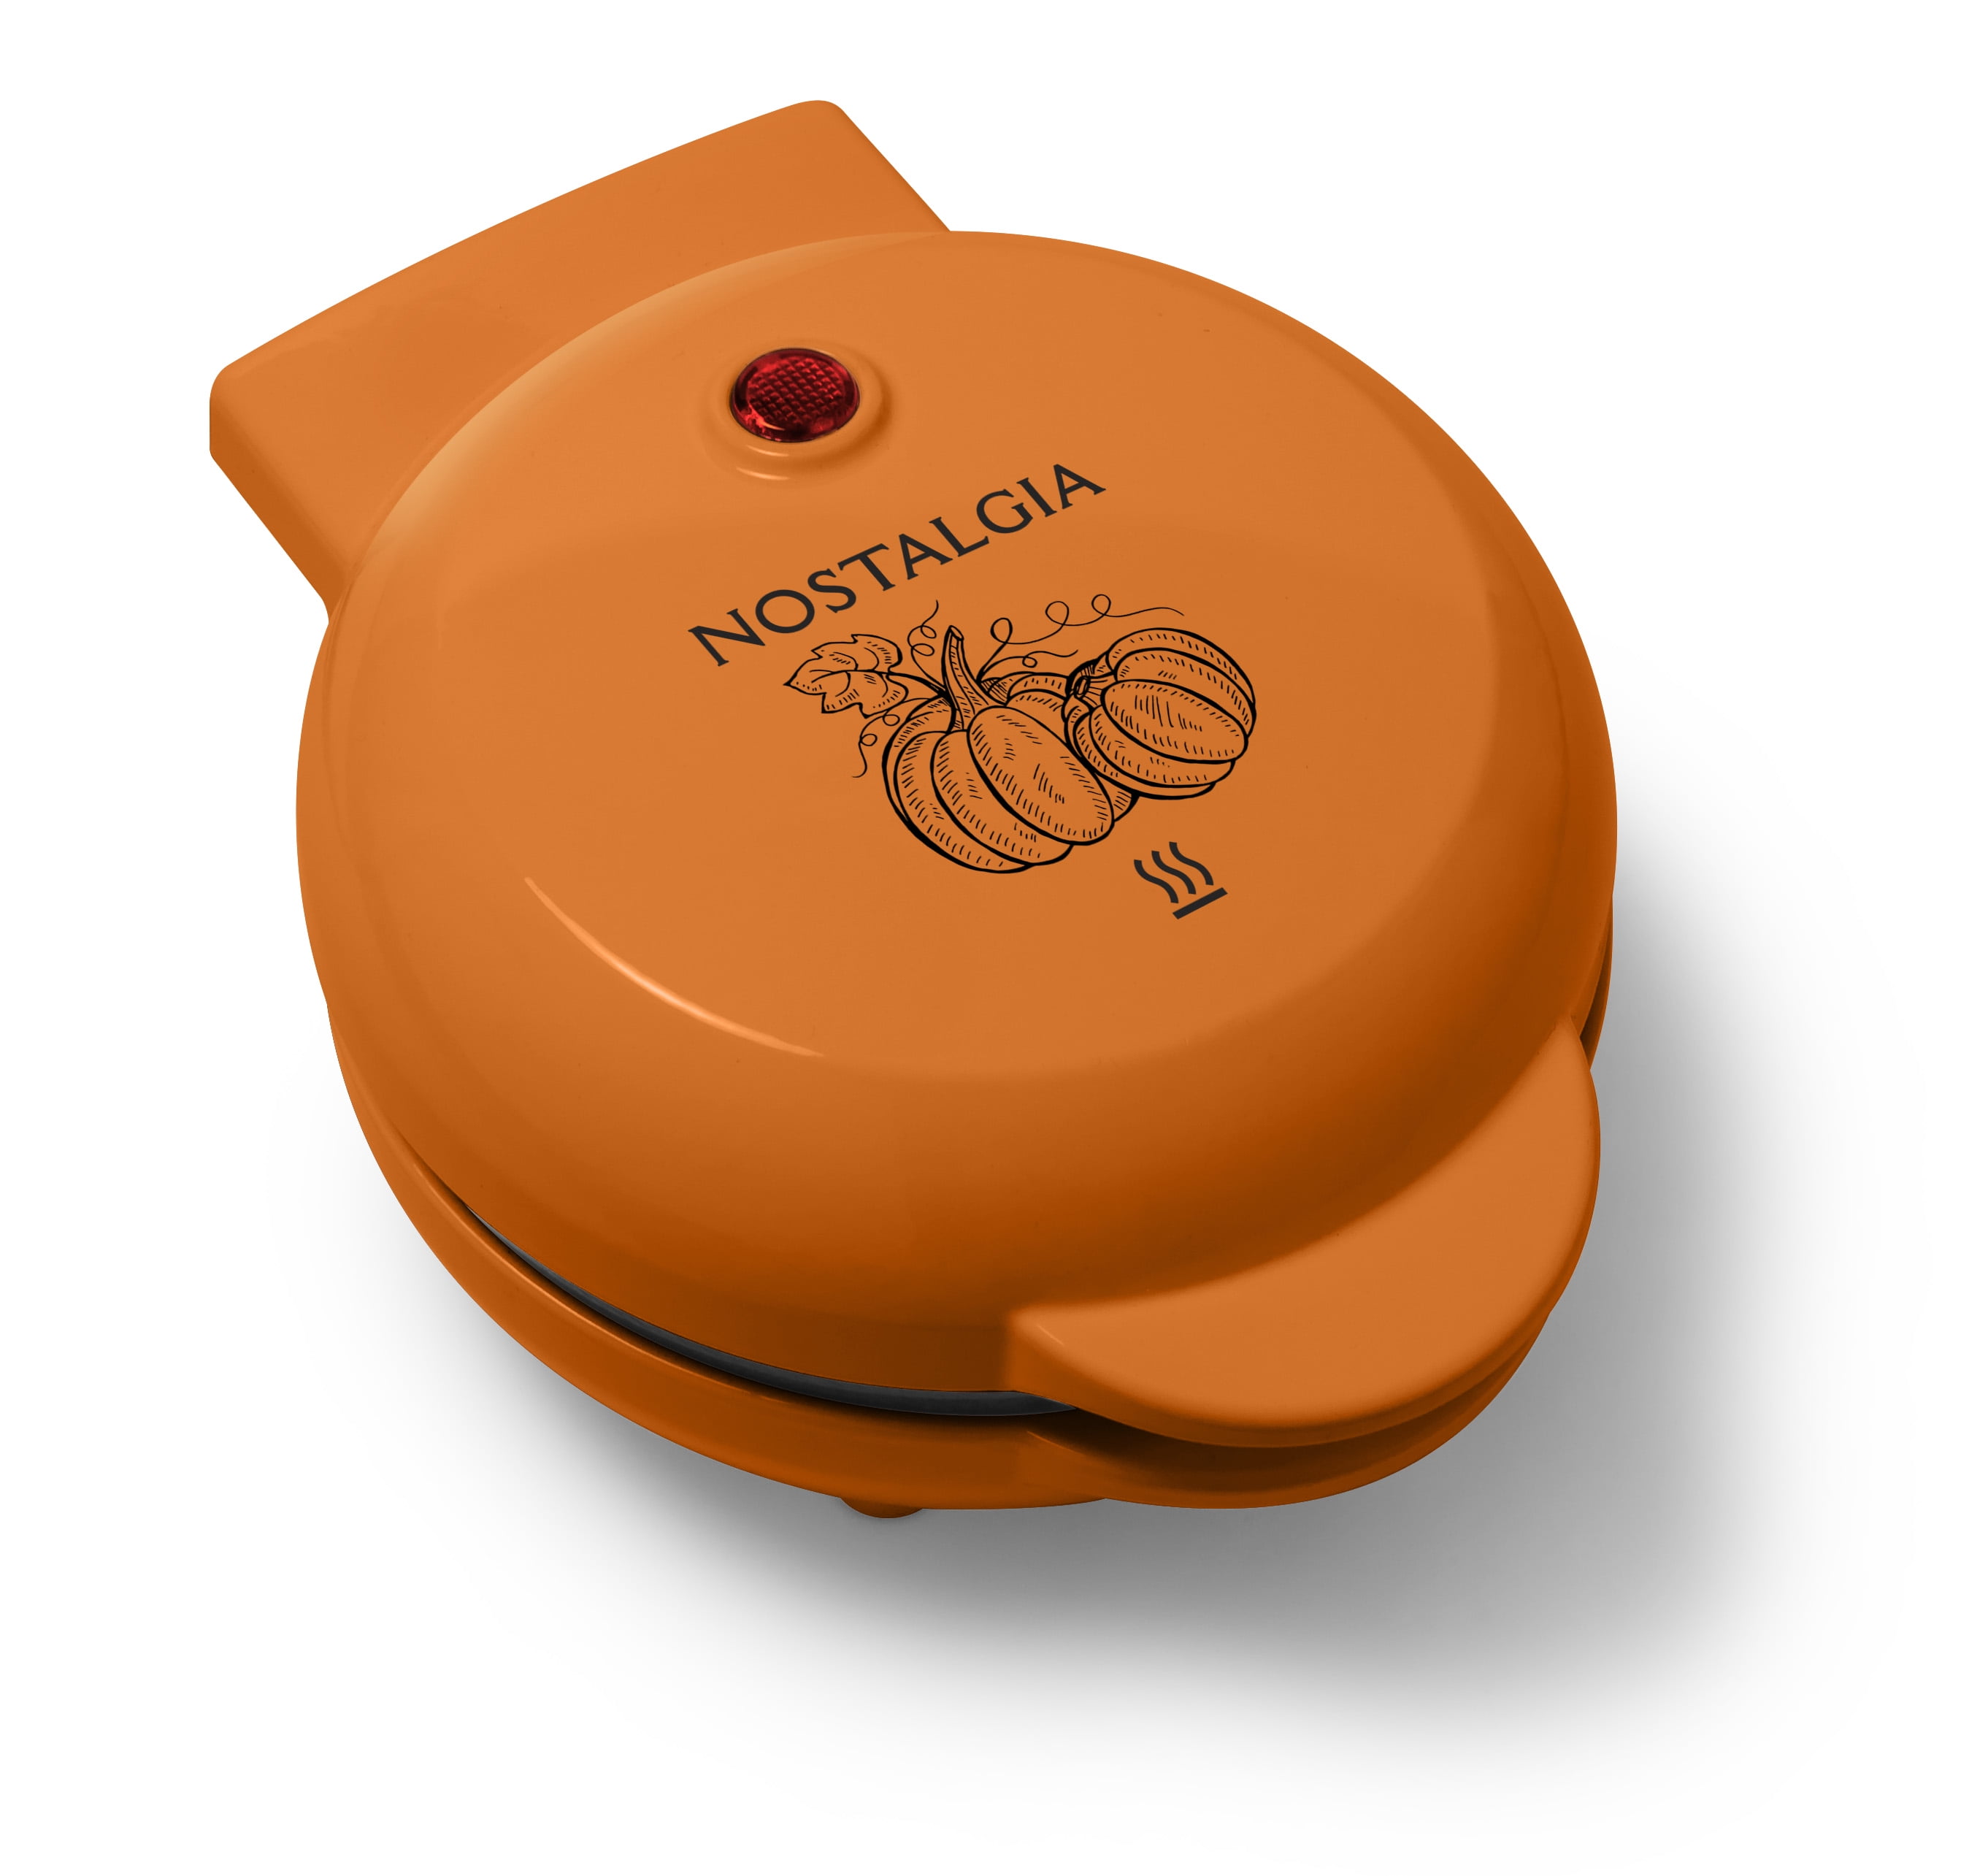 This Adorable Mini Pumpkin Waffle Maker Is 15% Off on  Right Now